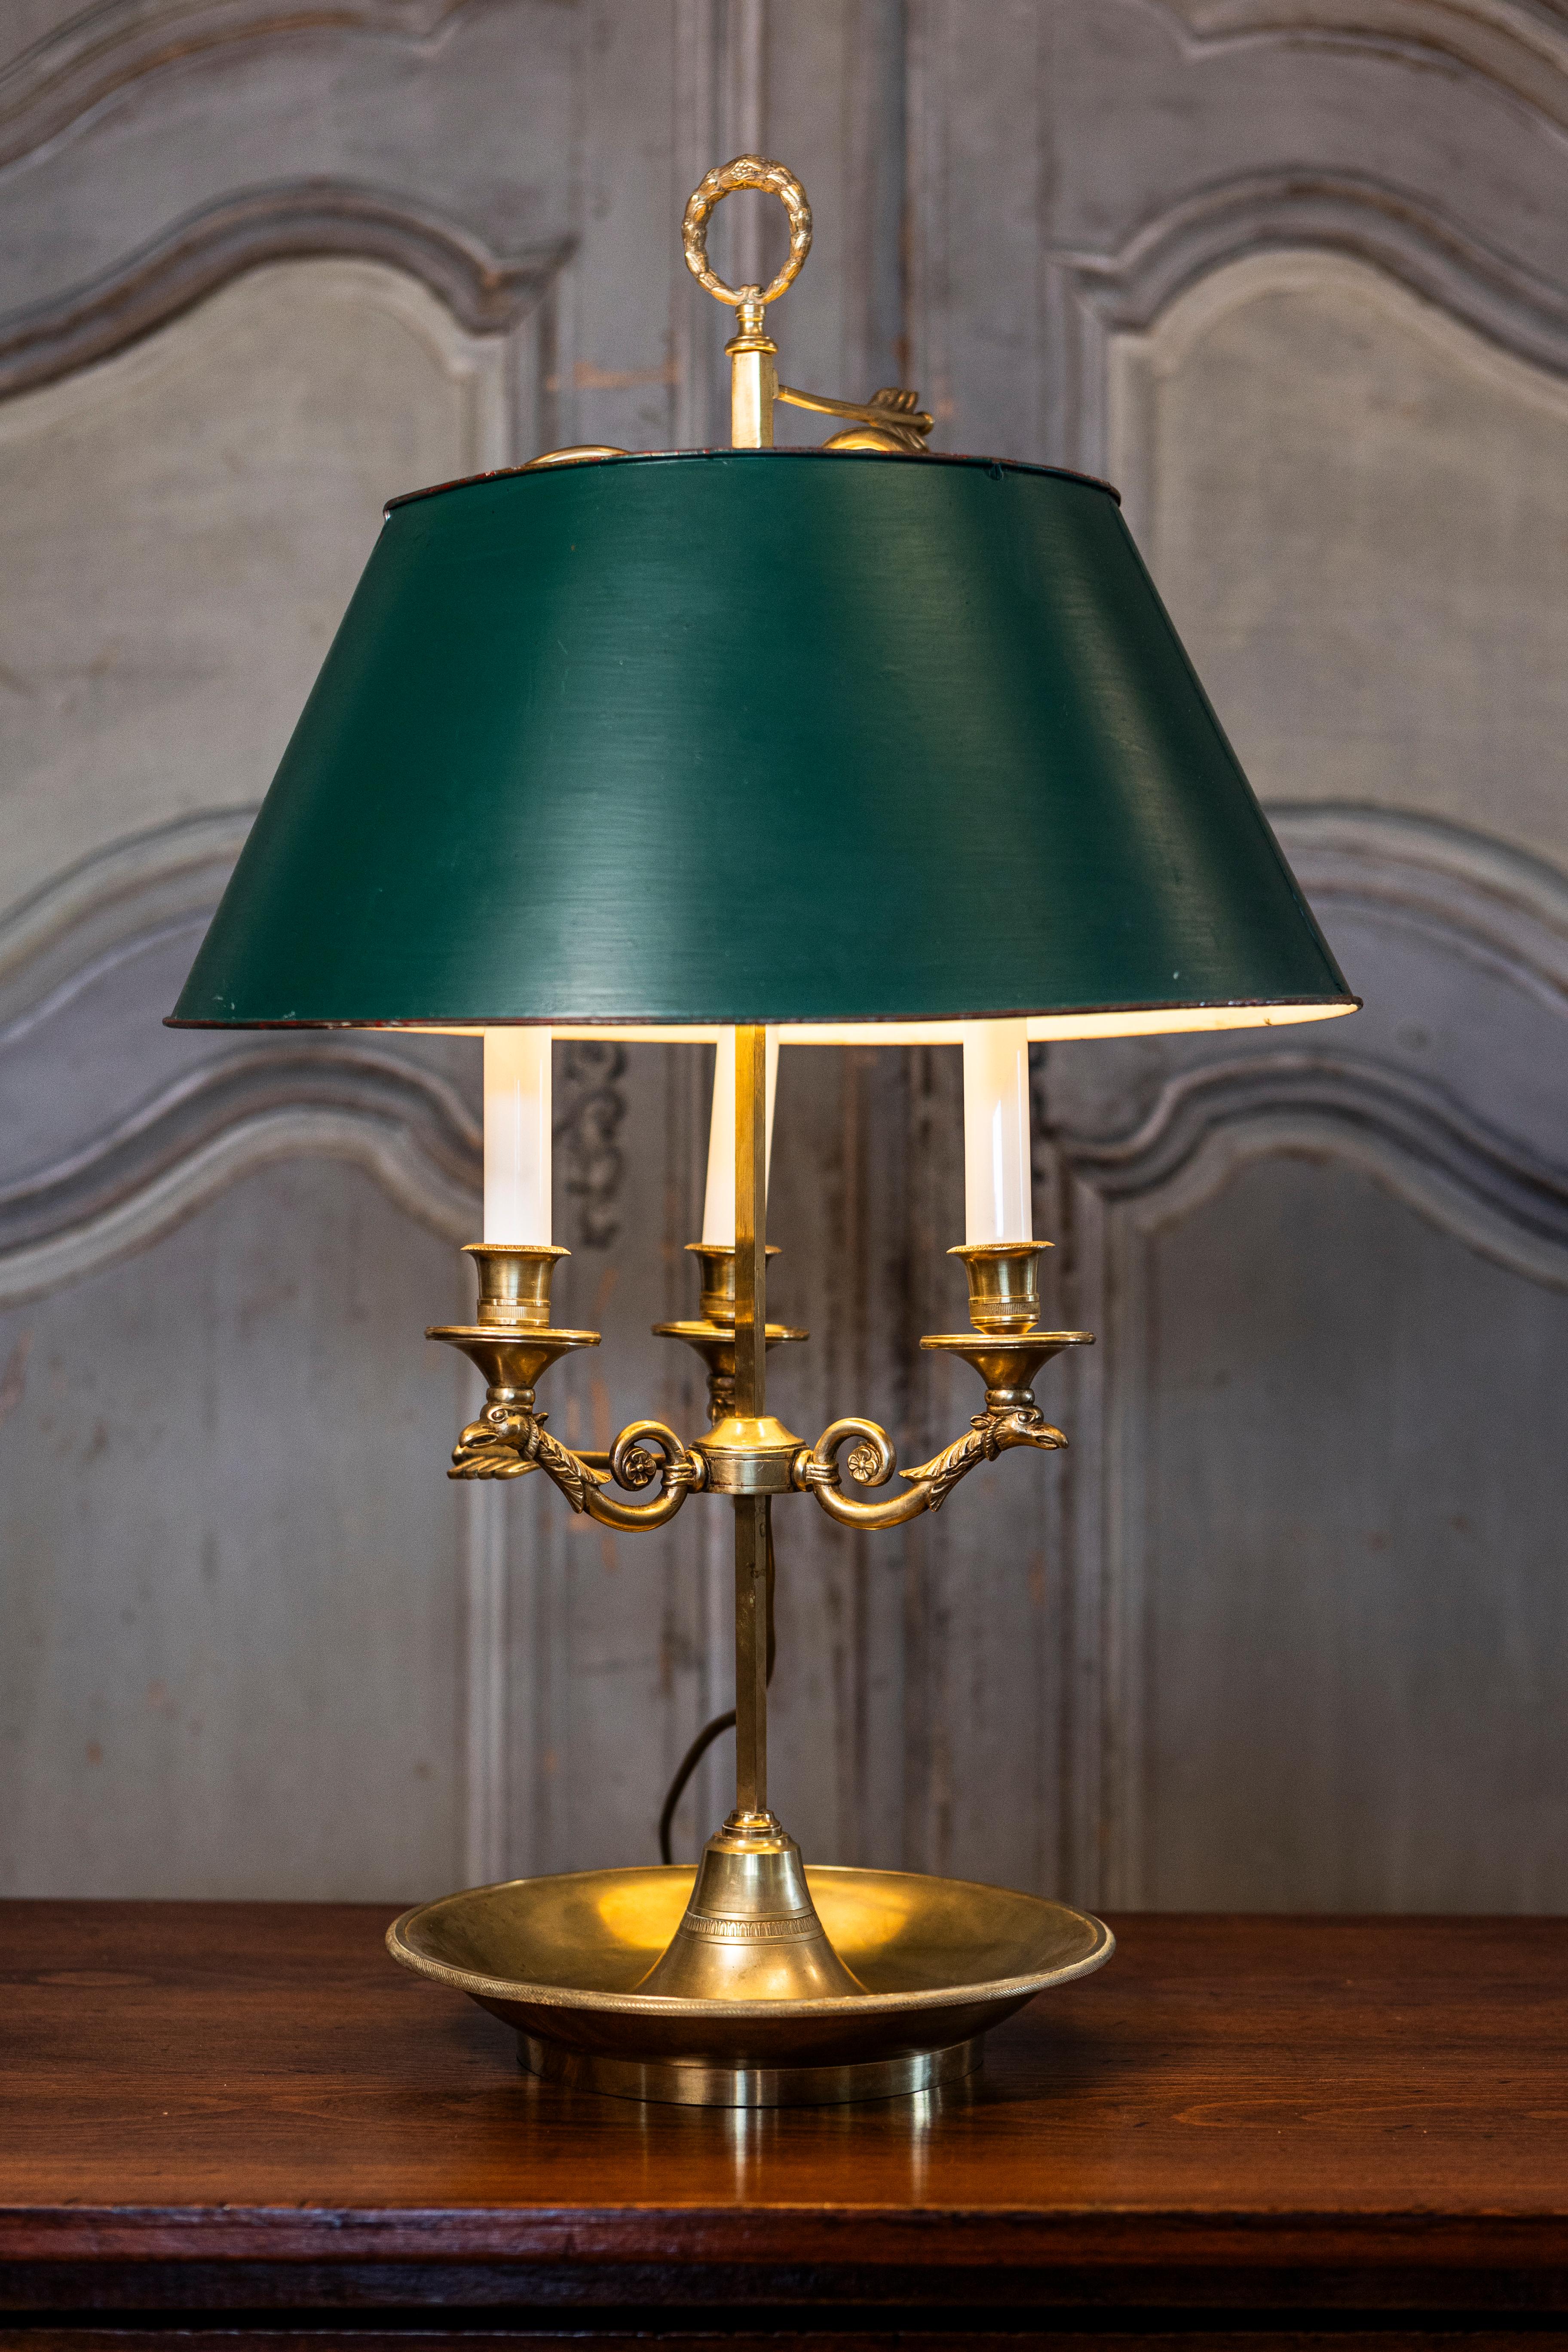 A French brass three-light bouillotte table lamp from the 19th century with green painted tôle shade, bird motifs and scrolling arms. This exquisite French bouillotte table lamp from the 19th century radiates timeless elegance, making it a